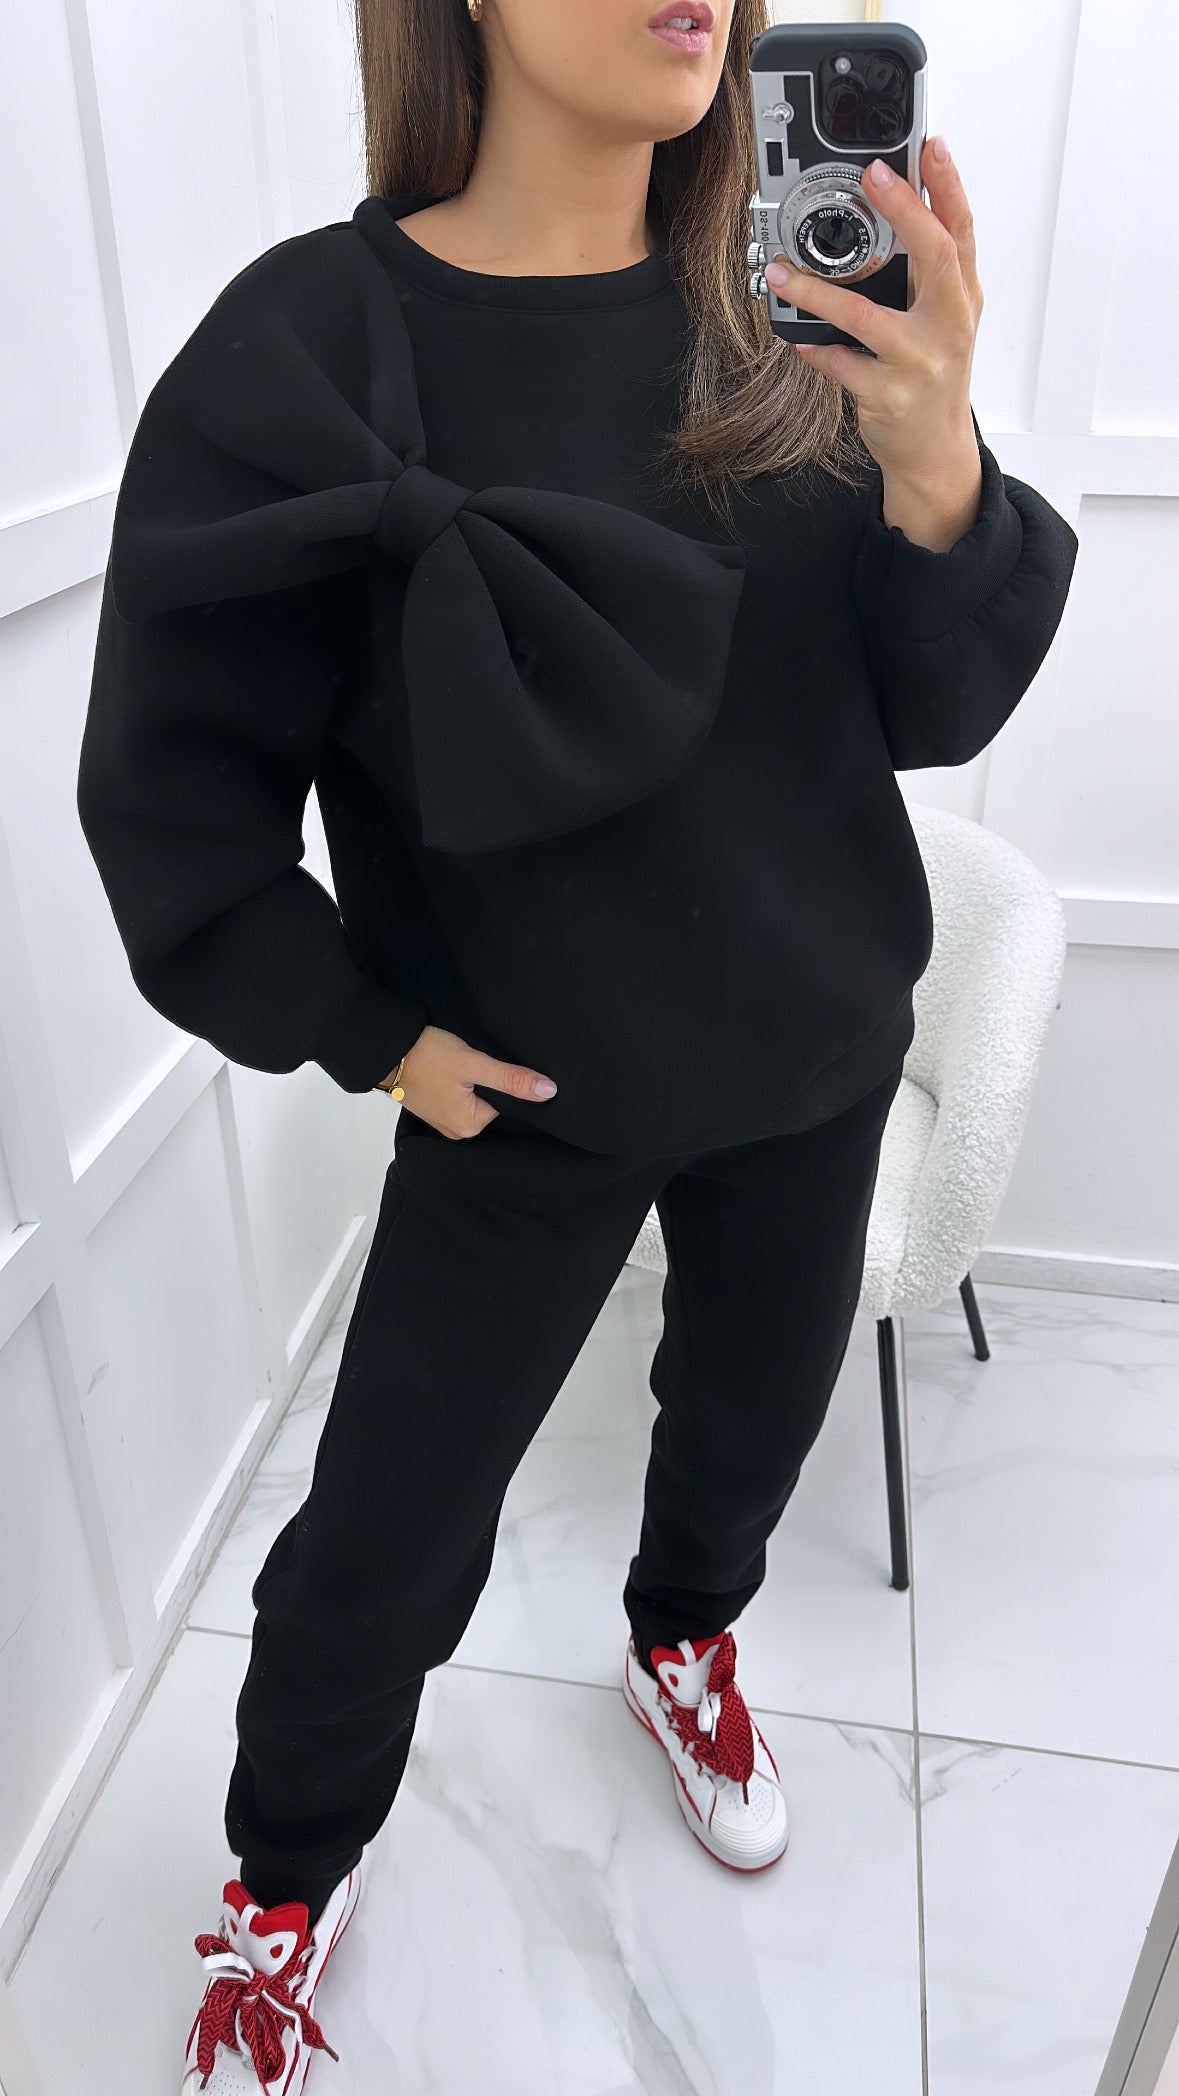 BONNIE black bow tracksuit – The Dressing Room